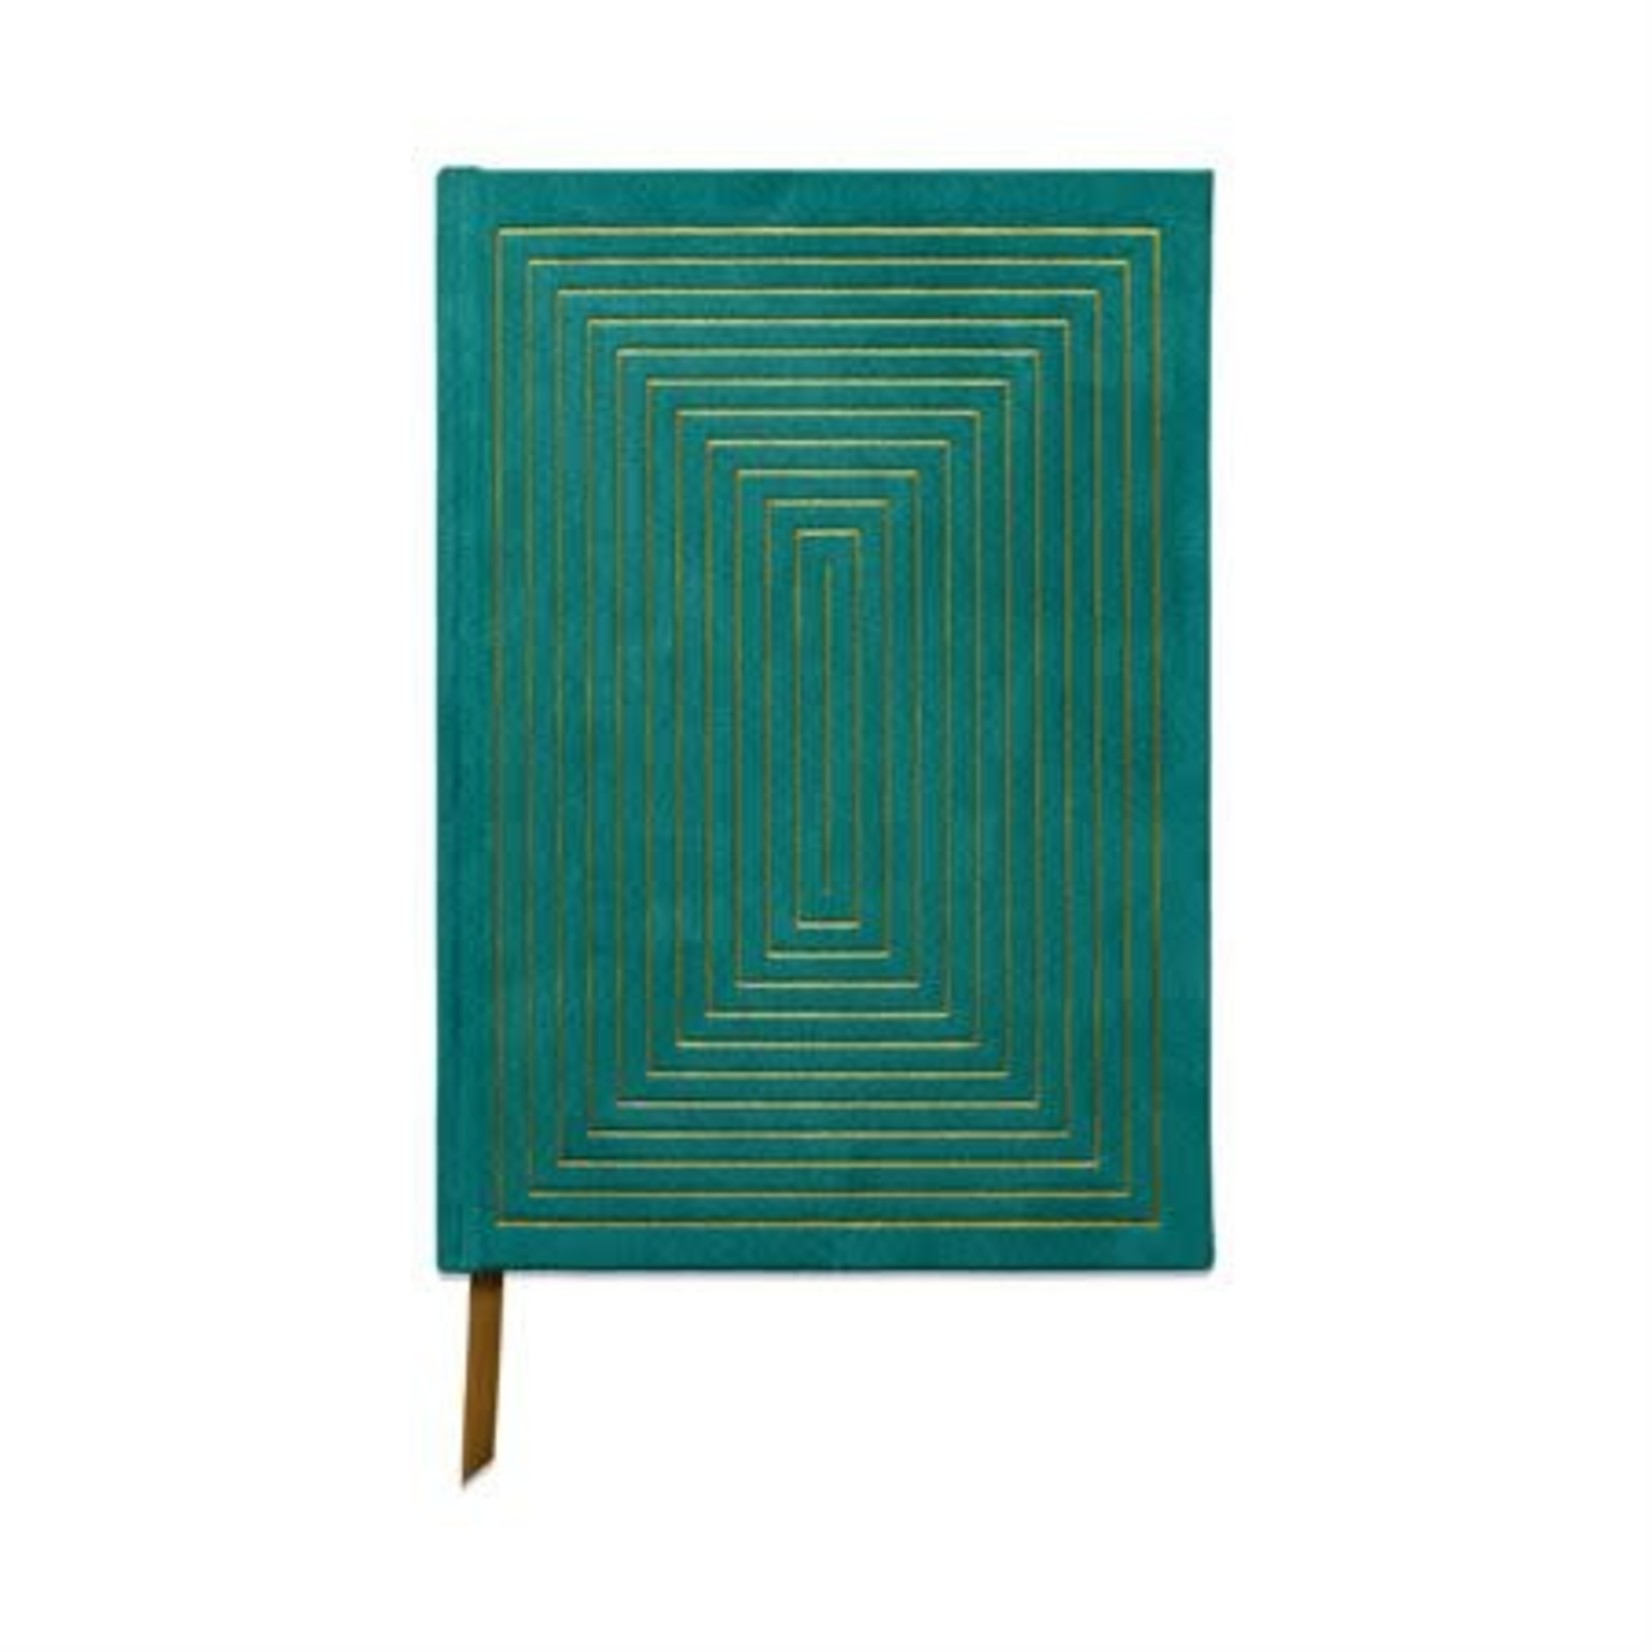 Linear Boxes Journal in Green